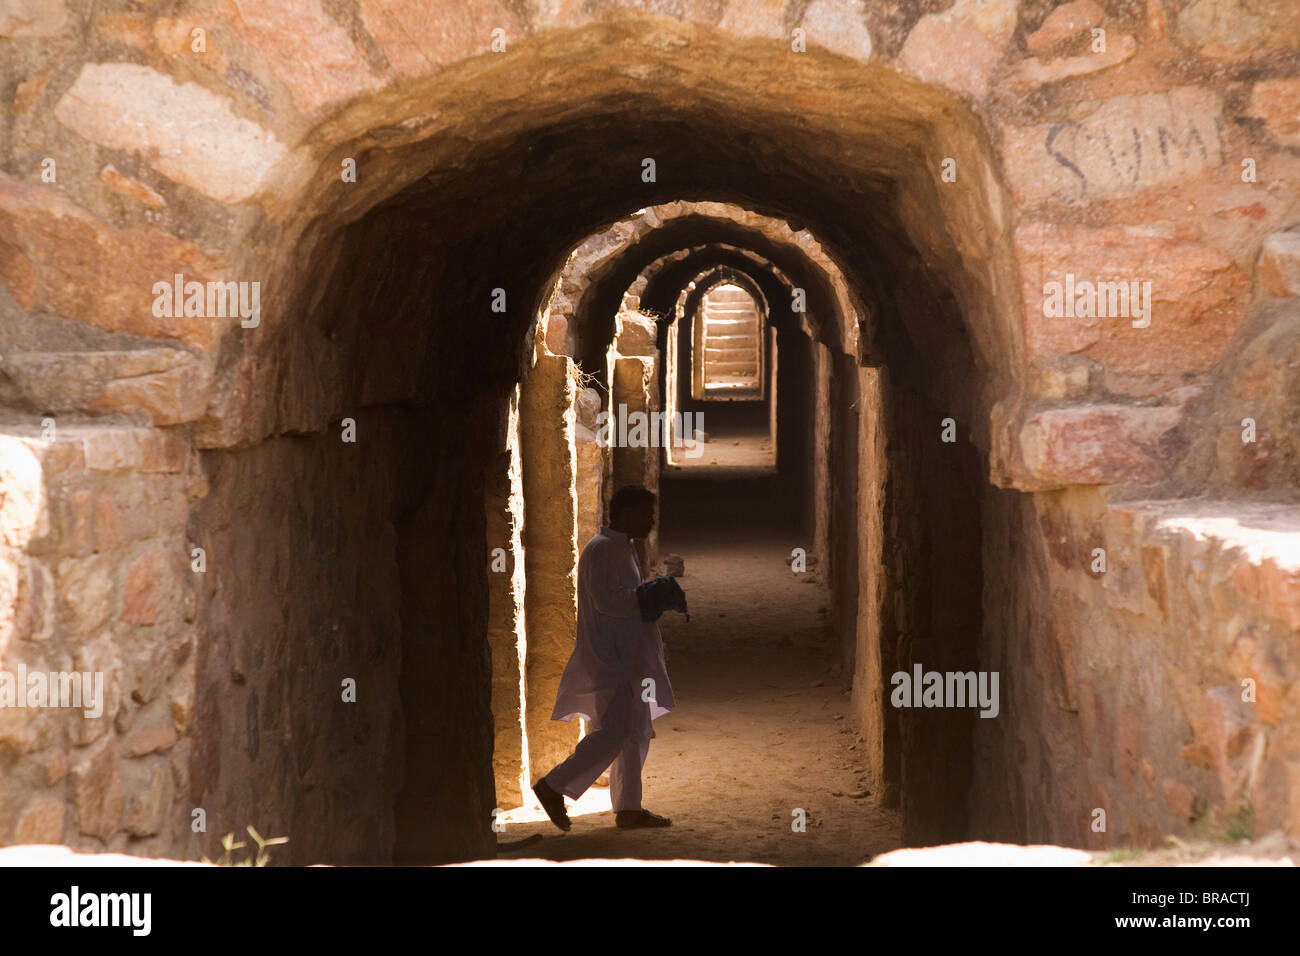 An Indian man visits the dungeons of Tughluqabad Fortress, Delhi, India Stock Photo